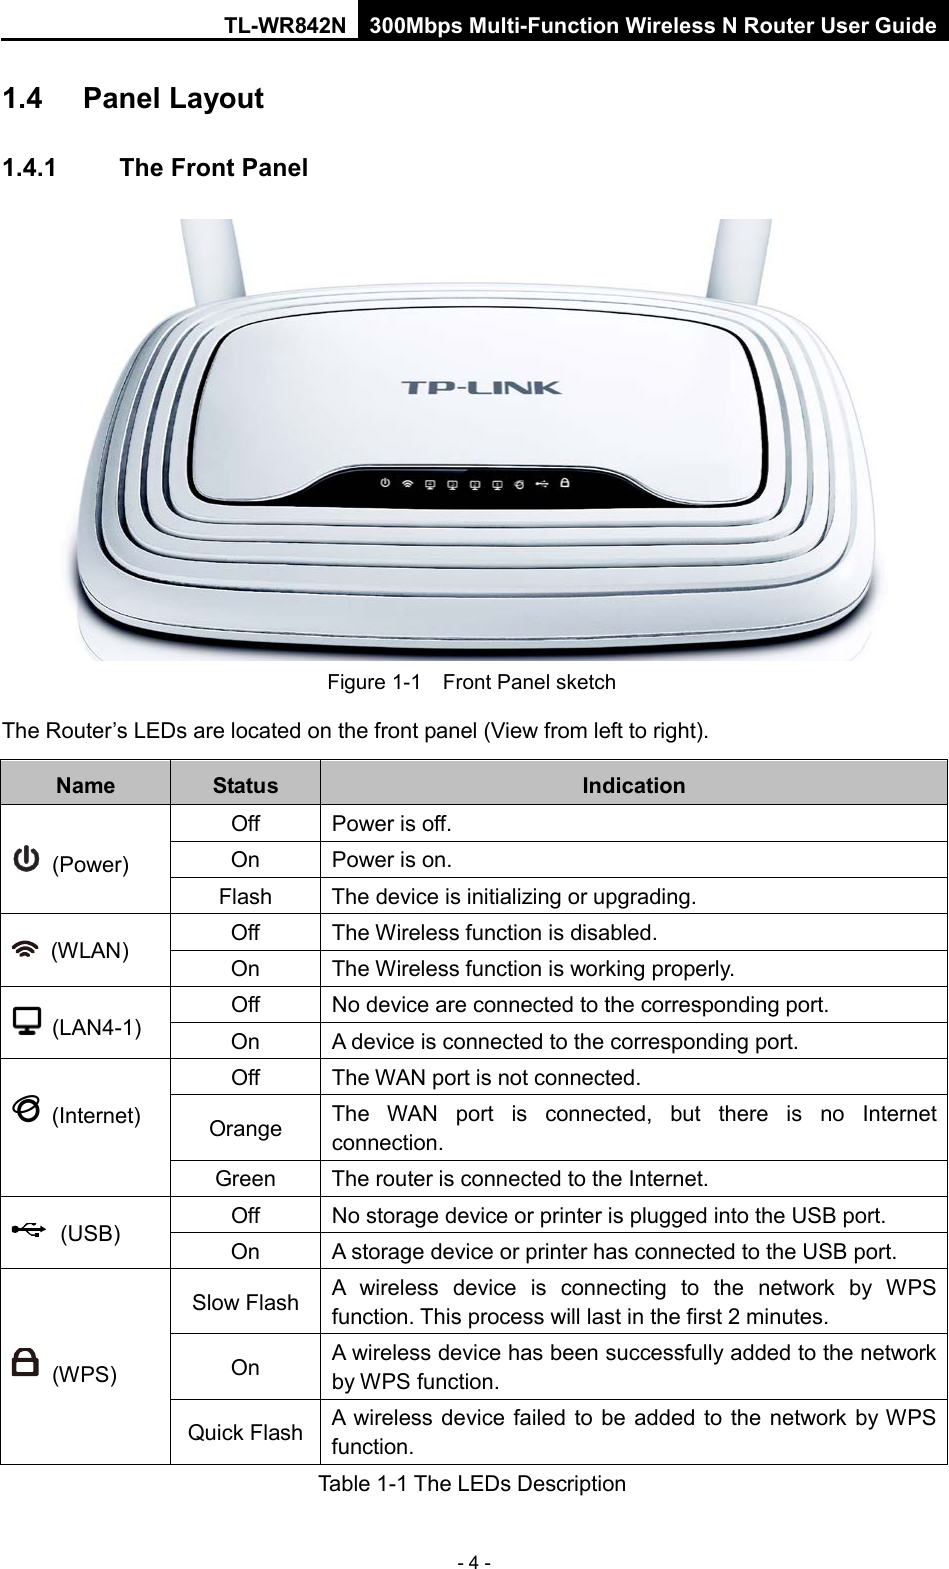 TL-WR842N 300Mbps Multi-Function Wireless N Router User Guide  - 4 - 1.4  Panel Layout 1.4.1 The Front Panel  Figure 1-1    Front Panel sketch The Router’s LEDs are located on the front panel (View from left to right).   Name Status Indication  (Power) Off Power is off. On Power is on. Flash The device is initializing or upgrading.  (WLAN)  Off The Wireless function is disabled. On The Wireless function is working properly.   (LAN4-1) Off No device are connected to the corresponding port. On A device is connected to the corresponding port.  (Internet)  Off The WAN port is not connected. Orange The WAN port is connected, but there is no Internet connection. Green The router is connected to the Internet.  (USB) Off No storage device or printer is plugged into the USB port. On A storage device or printer has connected to the USB port.     (WPS) Slow Flash A  wireless  device is connecting to the network by WPS function. This process will last in the first 2 minutes. On A wireless device has been successfully added to the network by WPS function.   Quick Flash A wireless device failed to be added to the network by WPS function. Table 1-1 The LEDs Description 